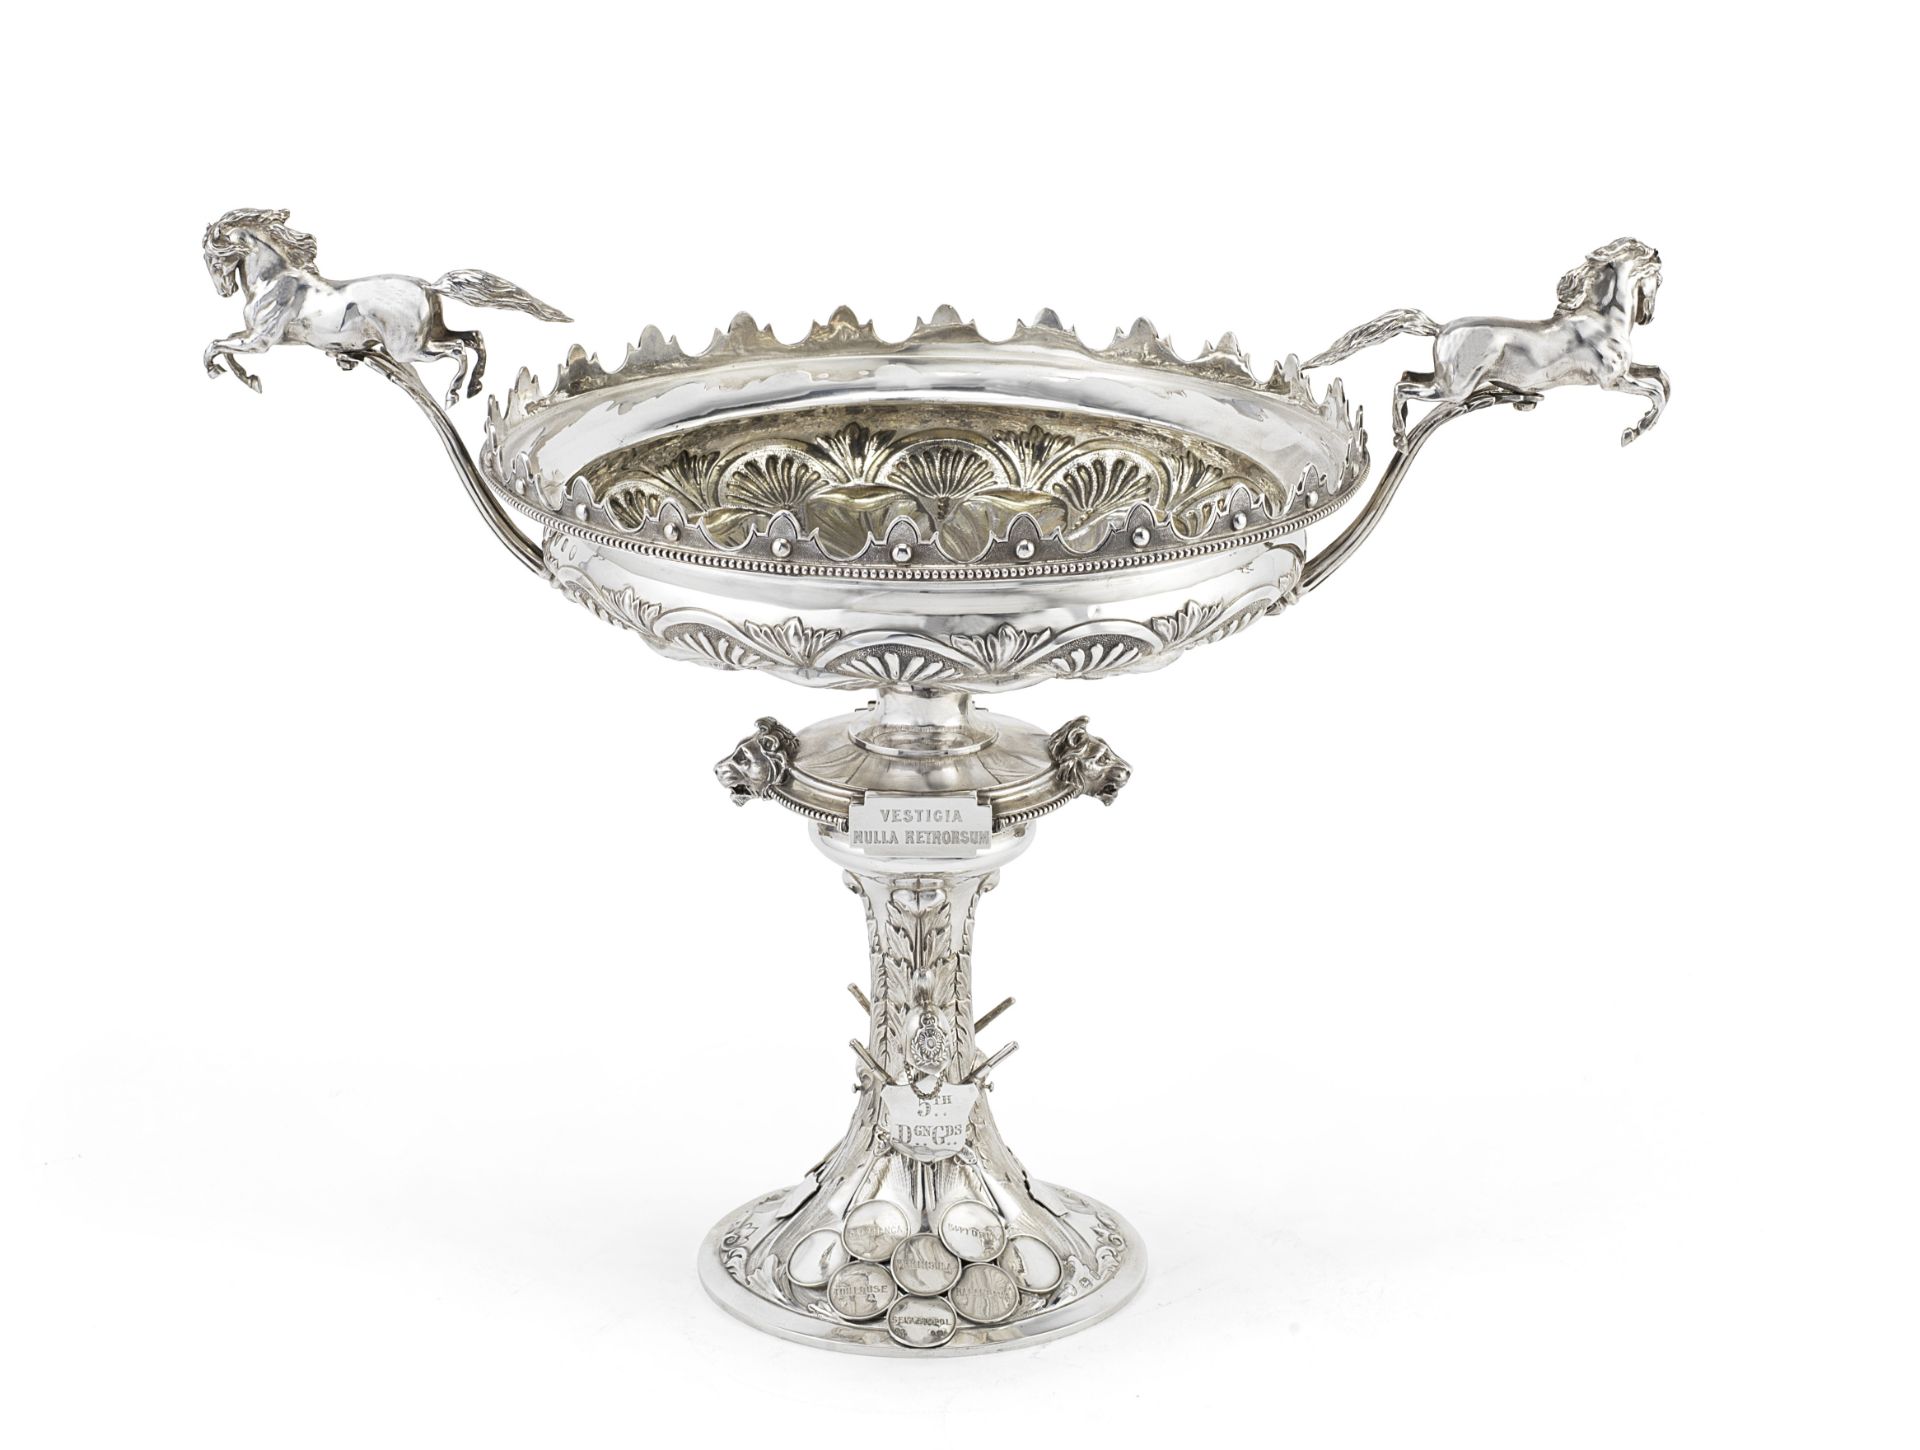 A Victorian silver regimental bowl for the 5th Dragoon Guards Edward Charles Brown, London 1869